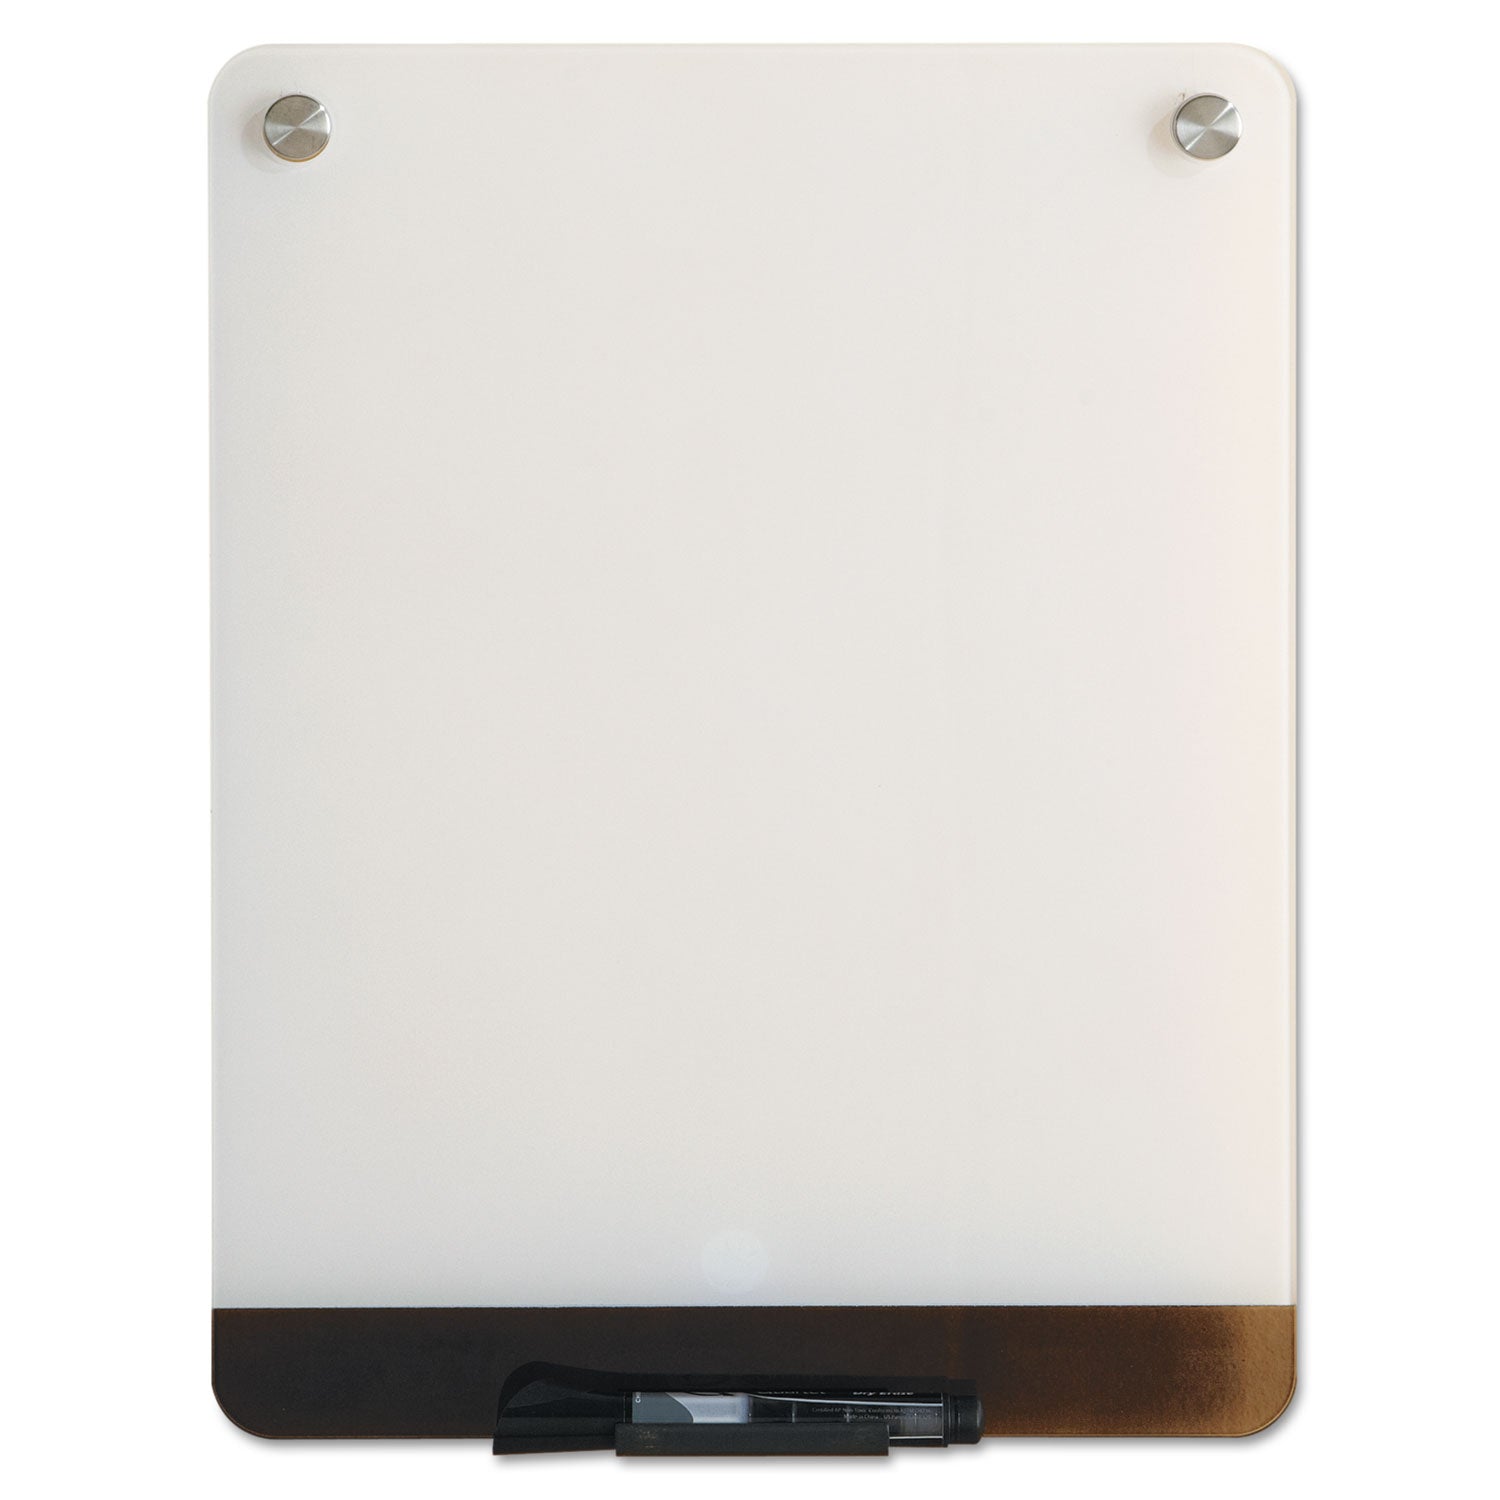 Clarity Personal Board, 12 x 16, Ultra-White Backing, Aluminum Frame - 